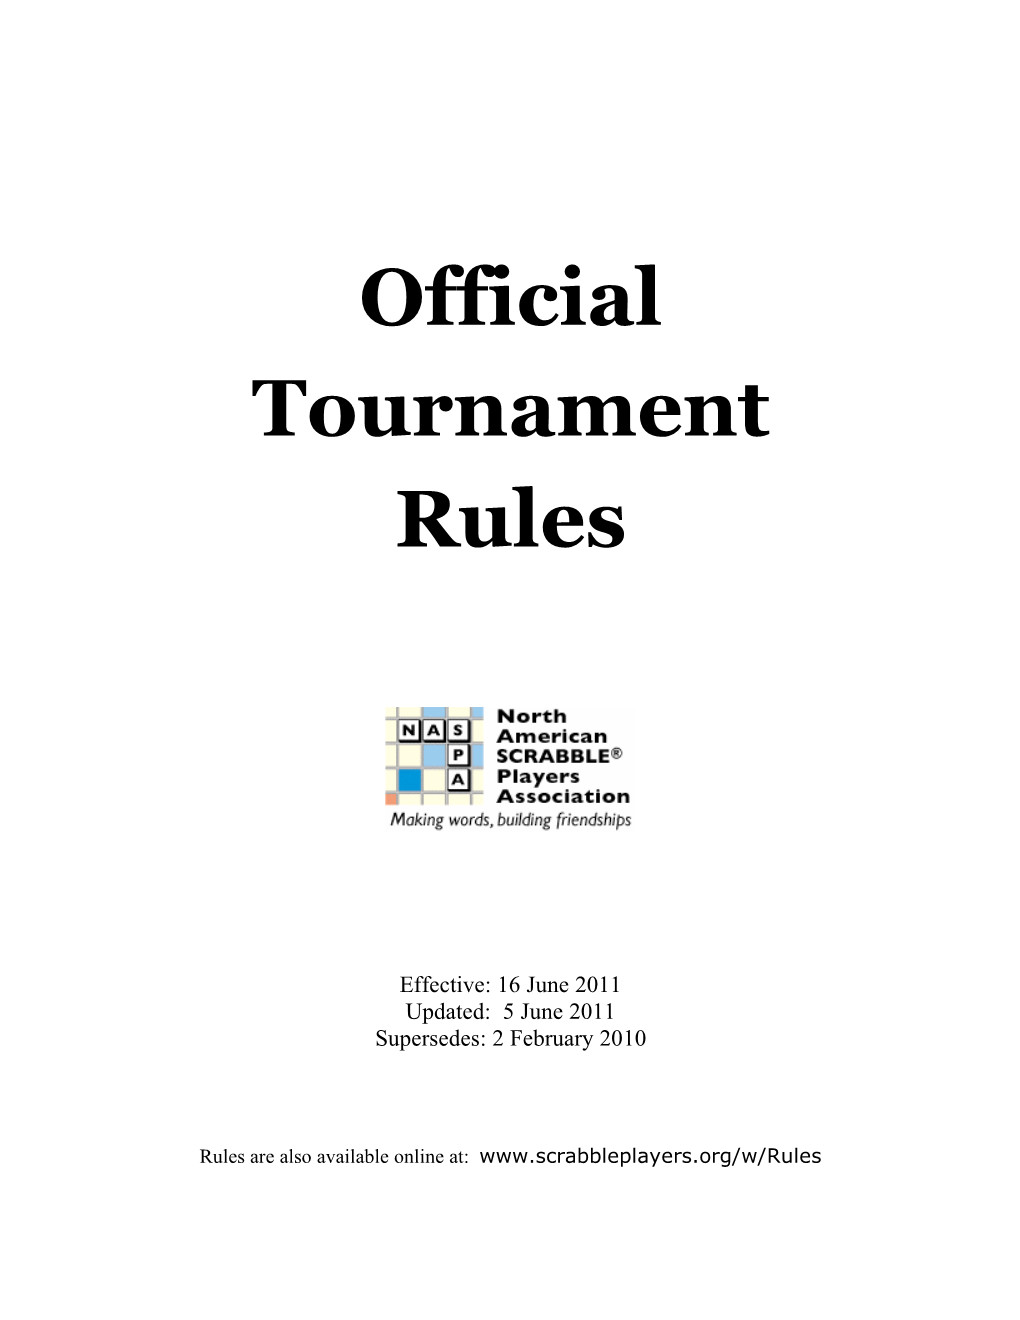 Official Tournament Rules